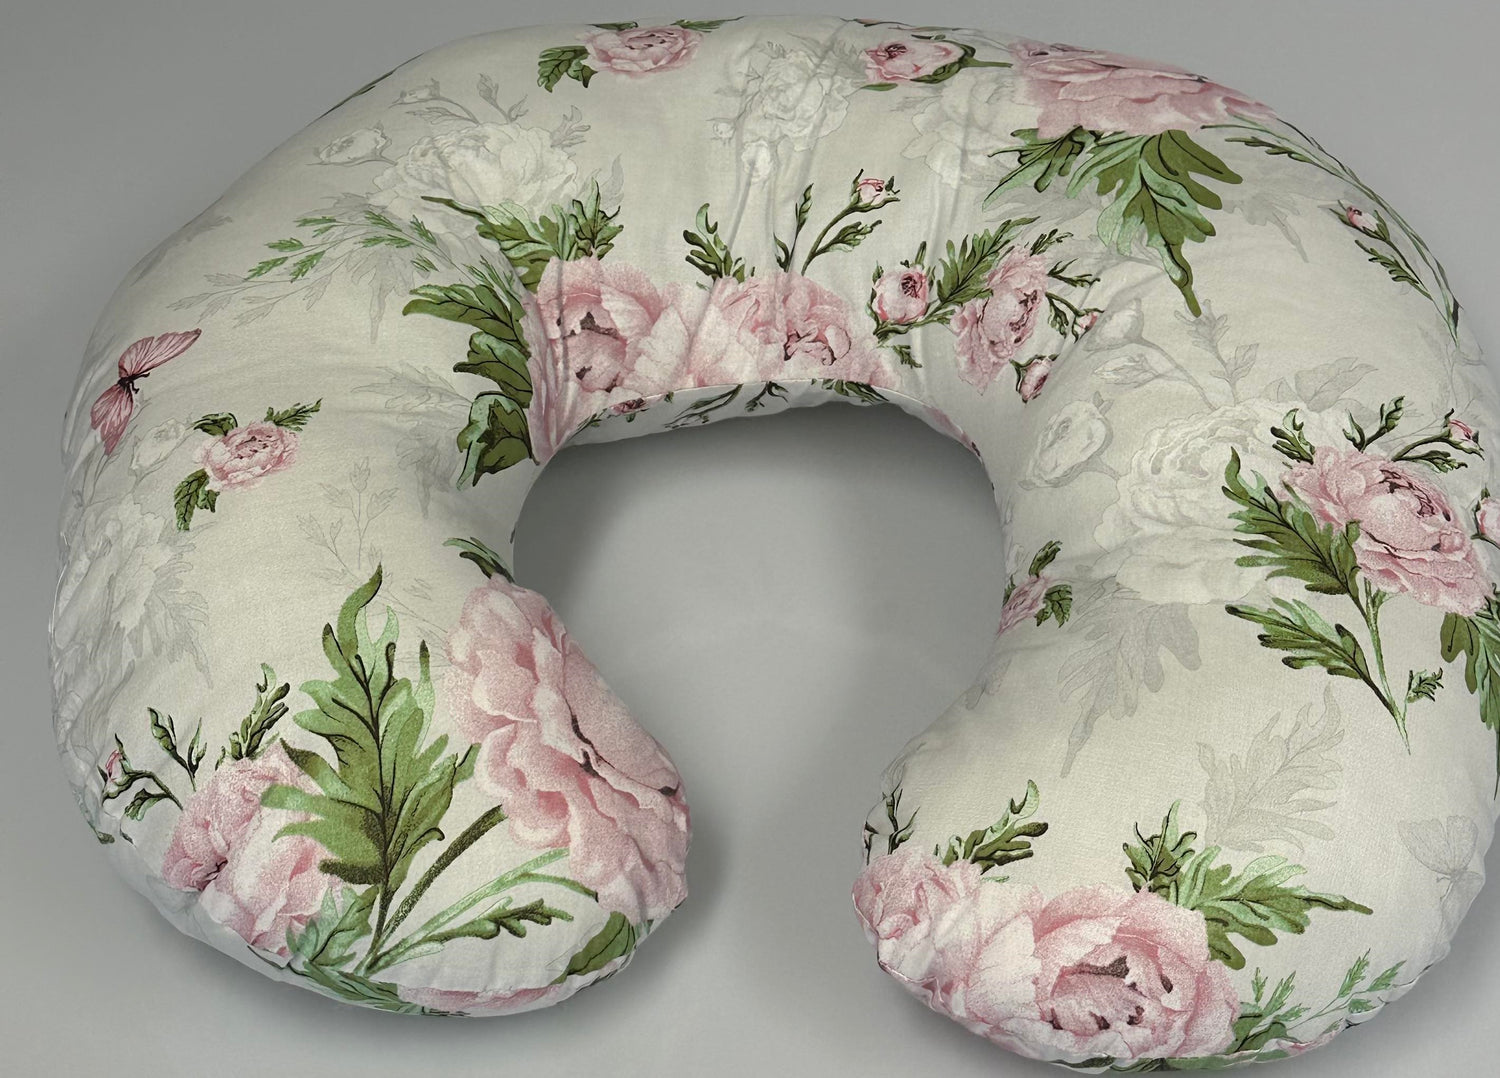 Cover Feeding Pillow Nursing Maternity Baby Breastfeeding Cotton Peony and Butterflies